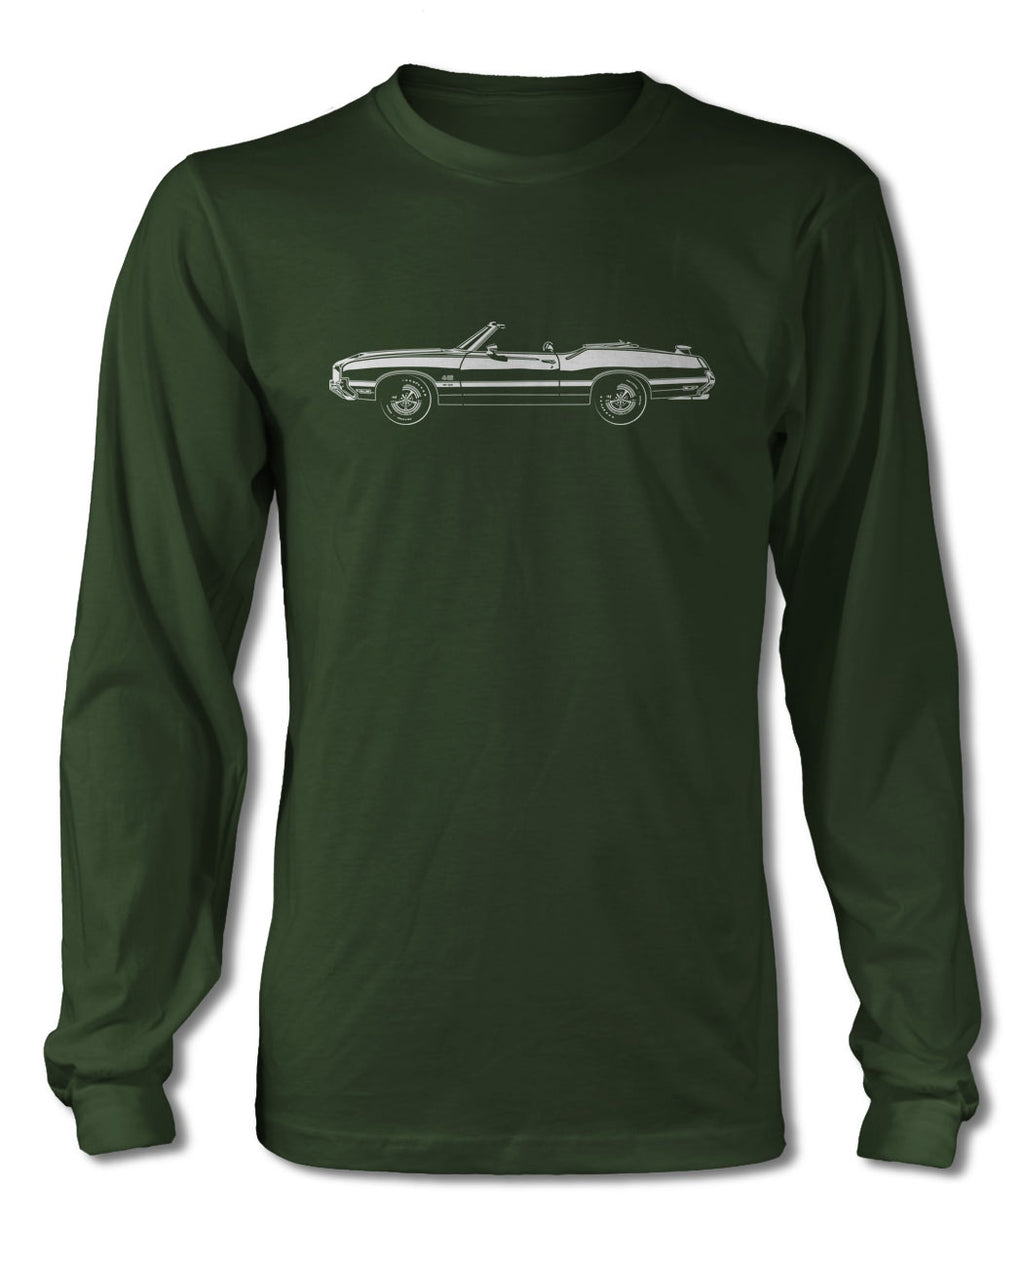 1971 Oldsmobile Cutlass 4-4-2 W-30 Convertible with Spoiler T-Shirt - Long Sleeves - Side View